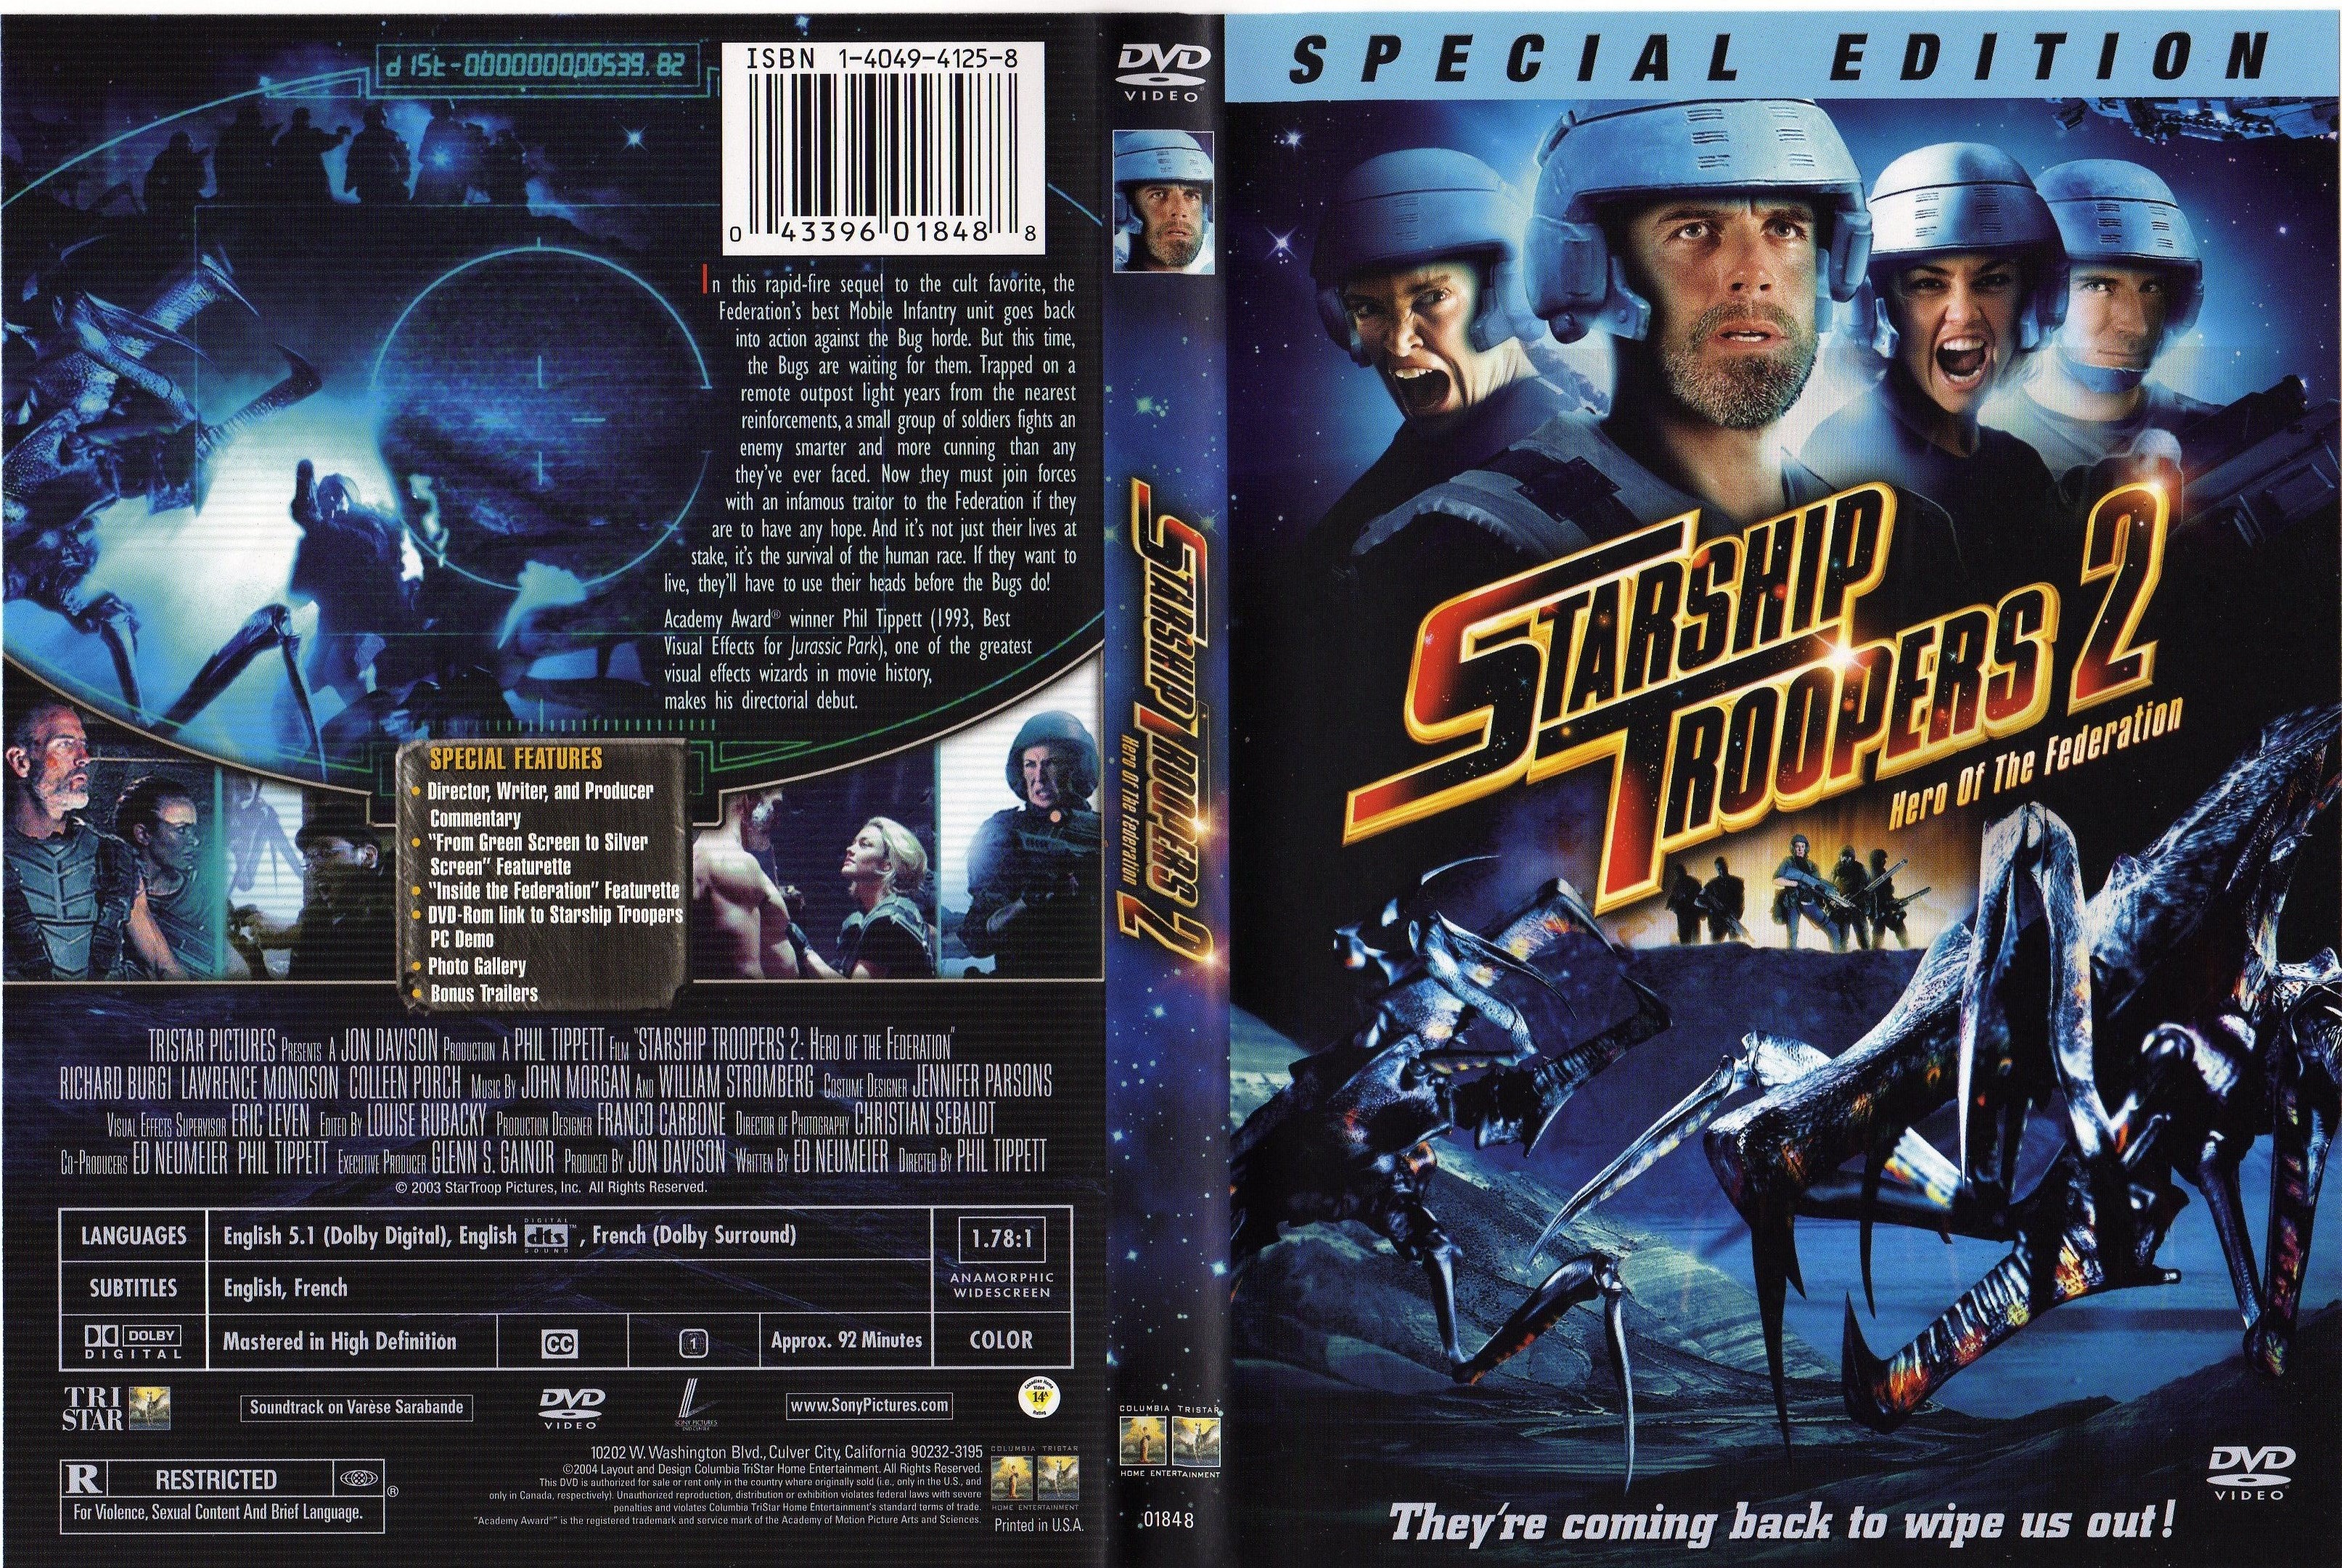 Jaquette DVD Starship troopers 2 (Canadienne)